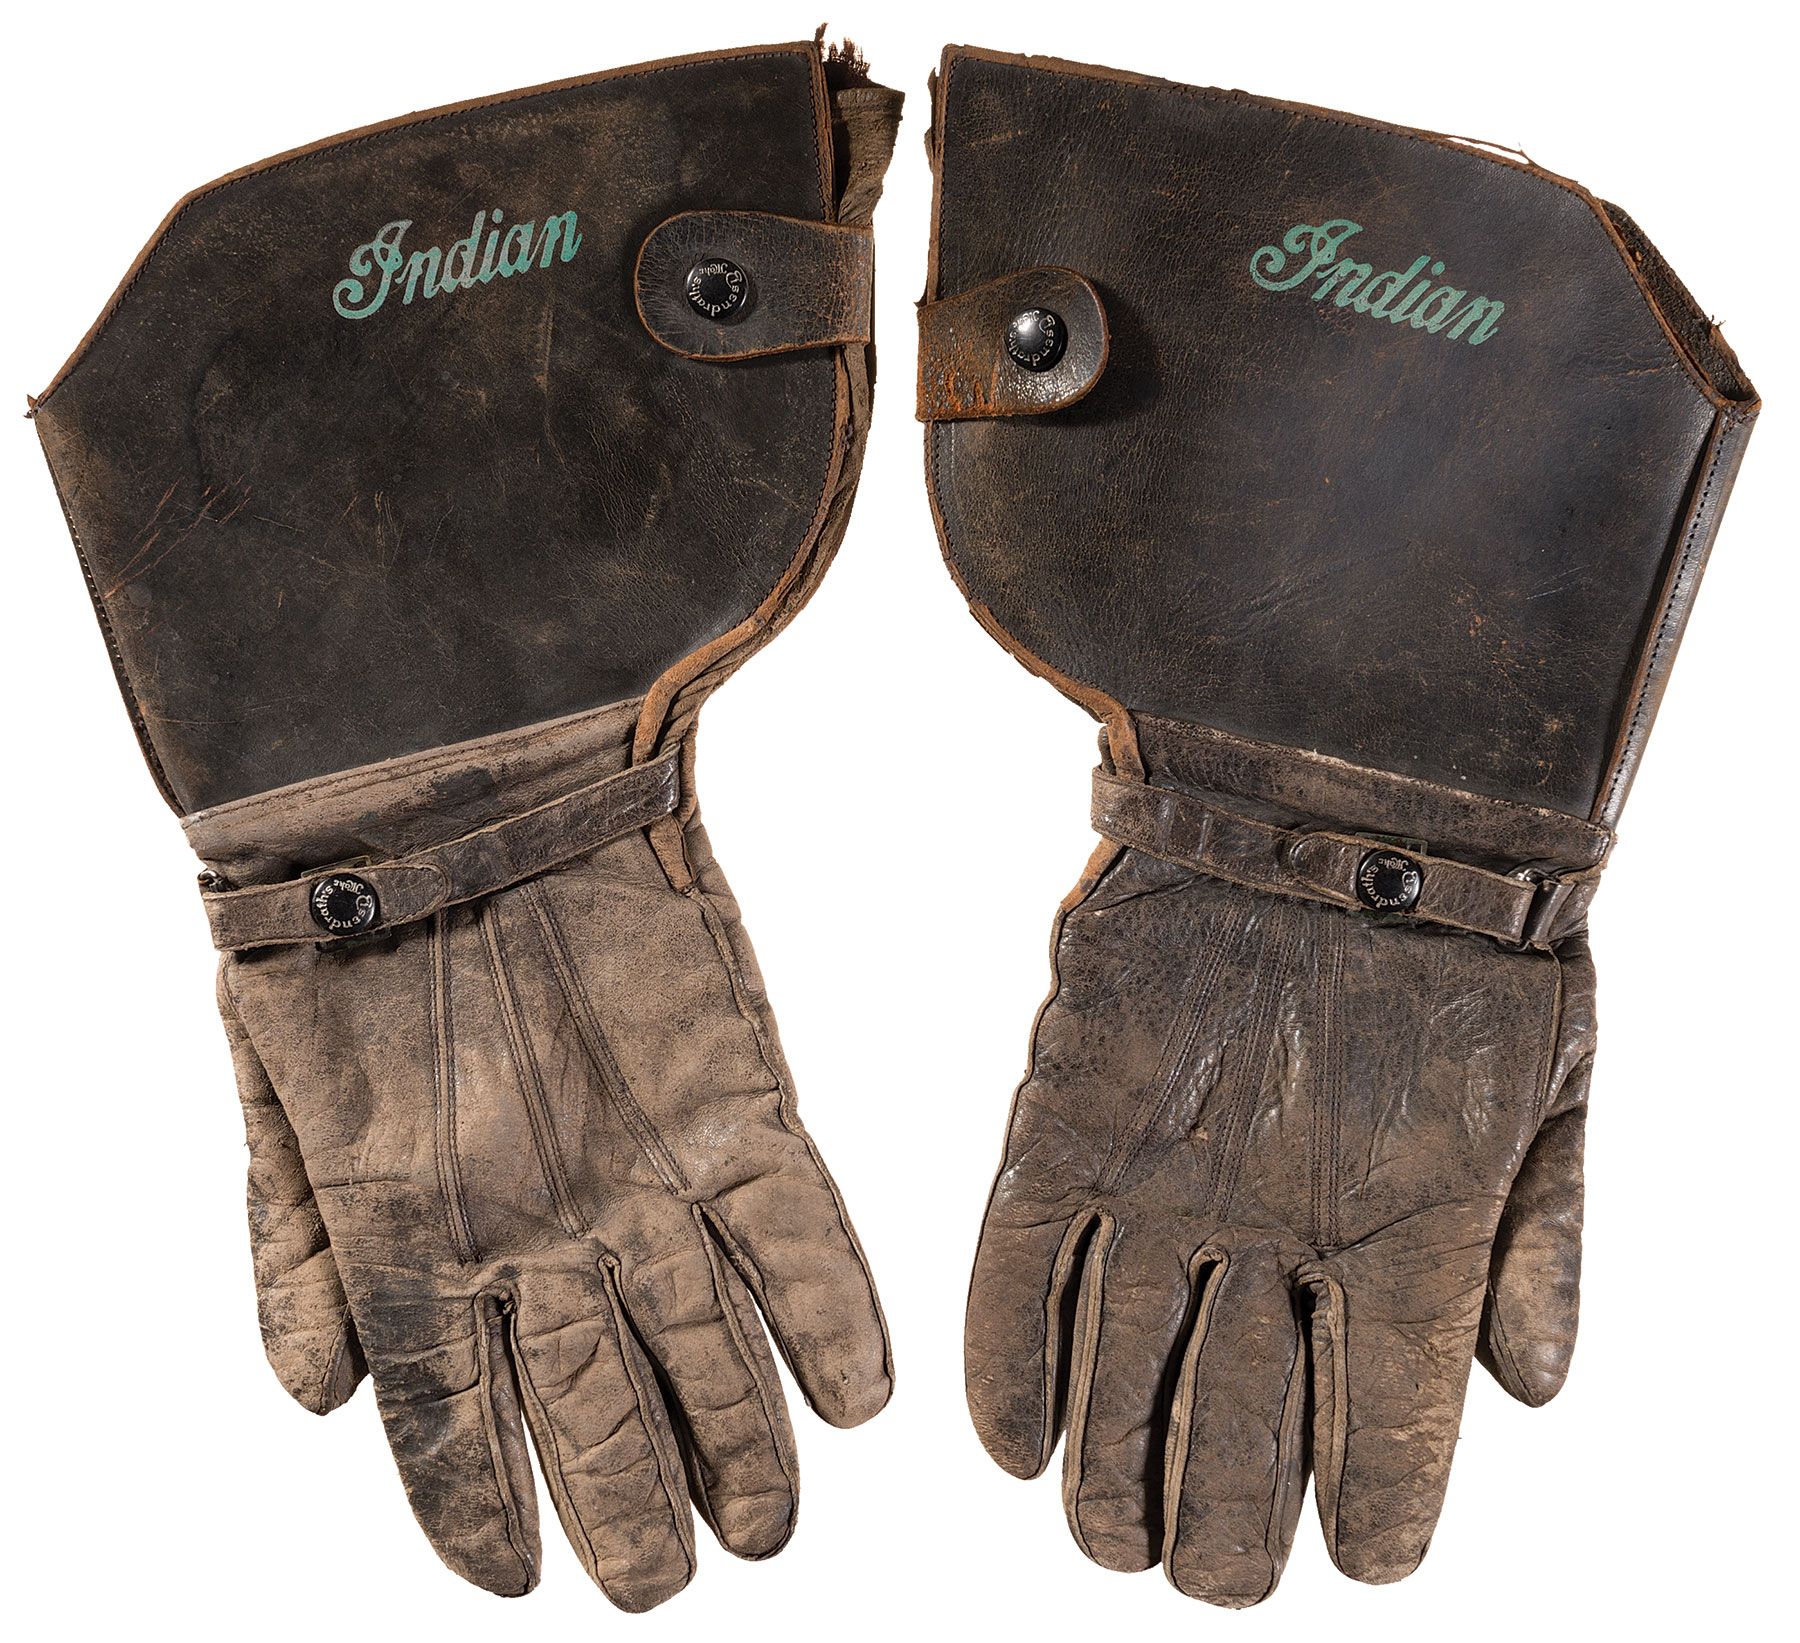 Indian Motorcycle Gloves, Attributed to Steve McQueen